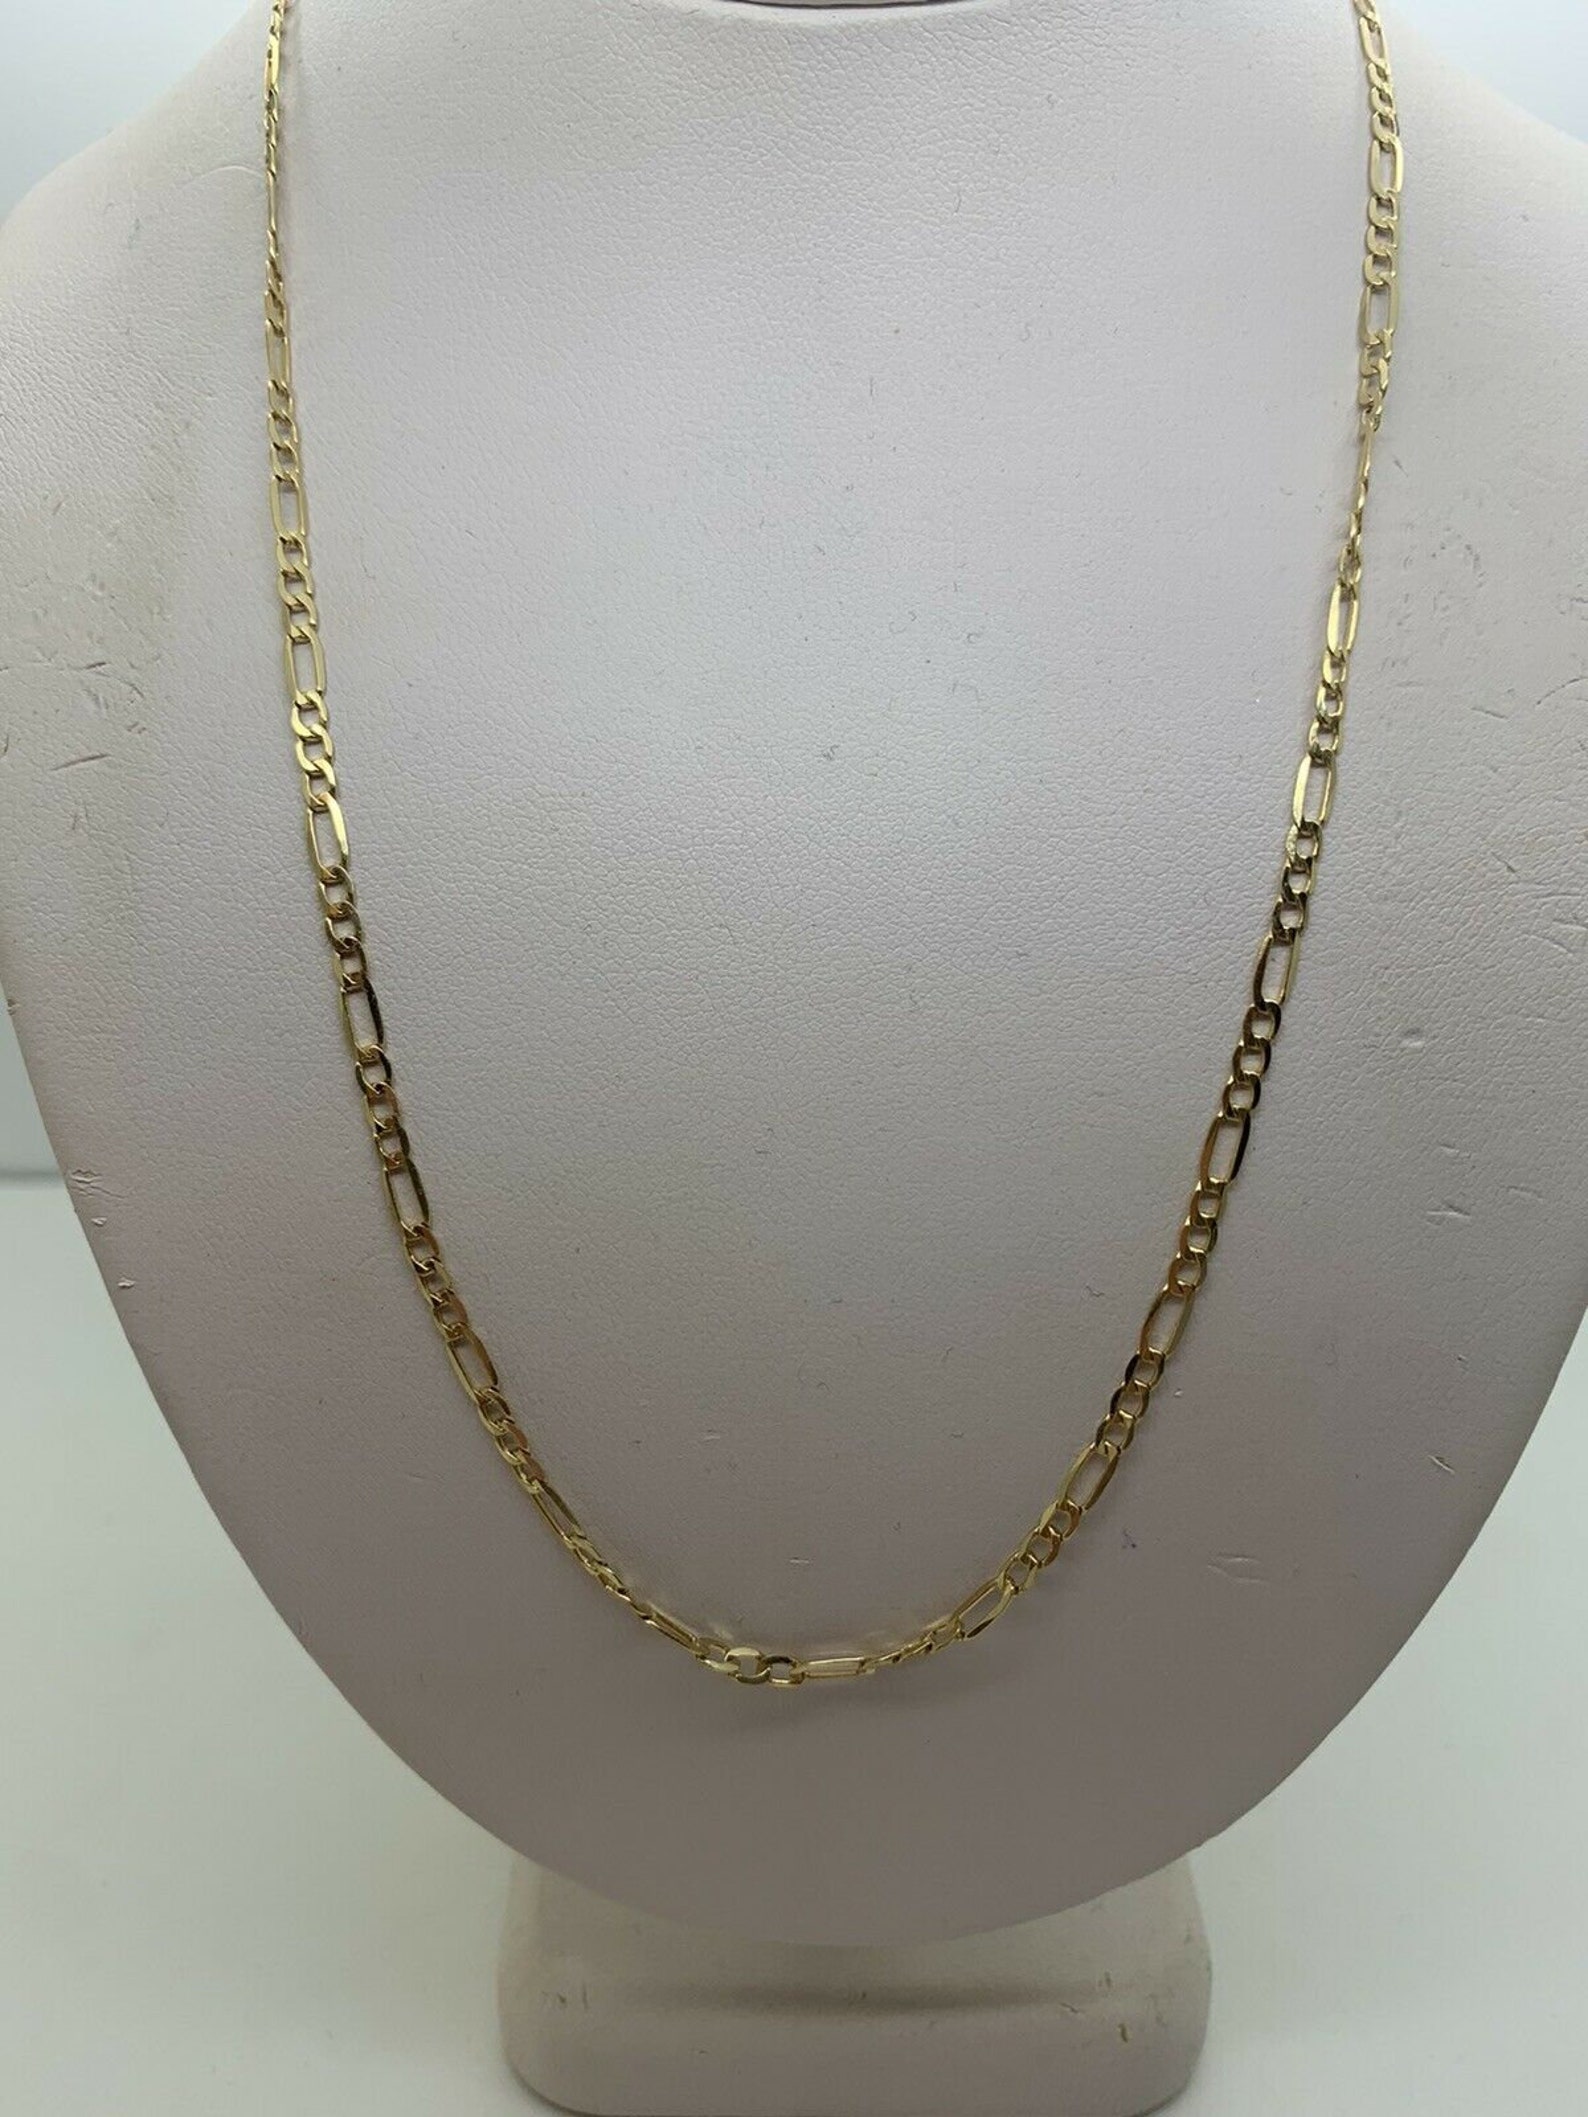 14K White Gold Elongated Figaro Chain 16 Inches 3.6 Grams Made | Etsy